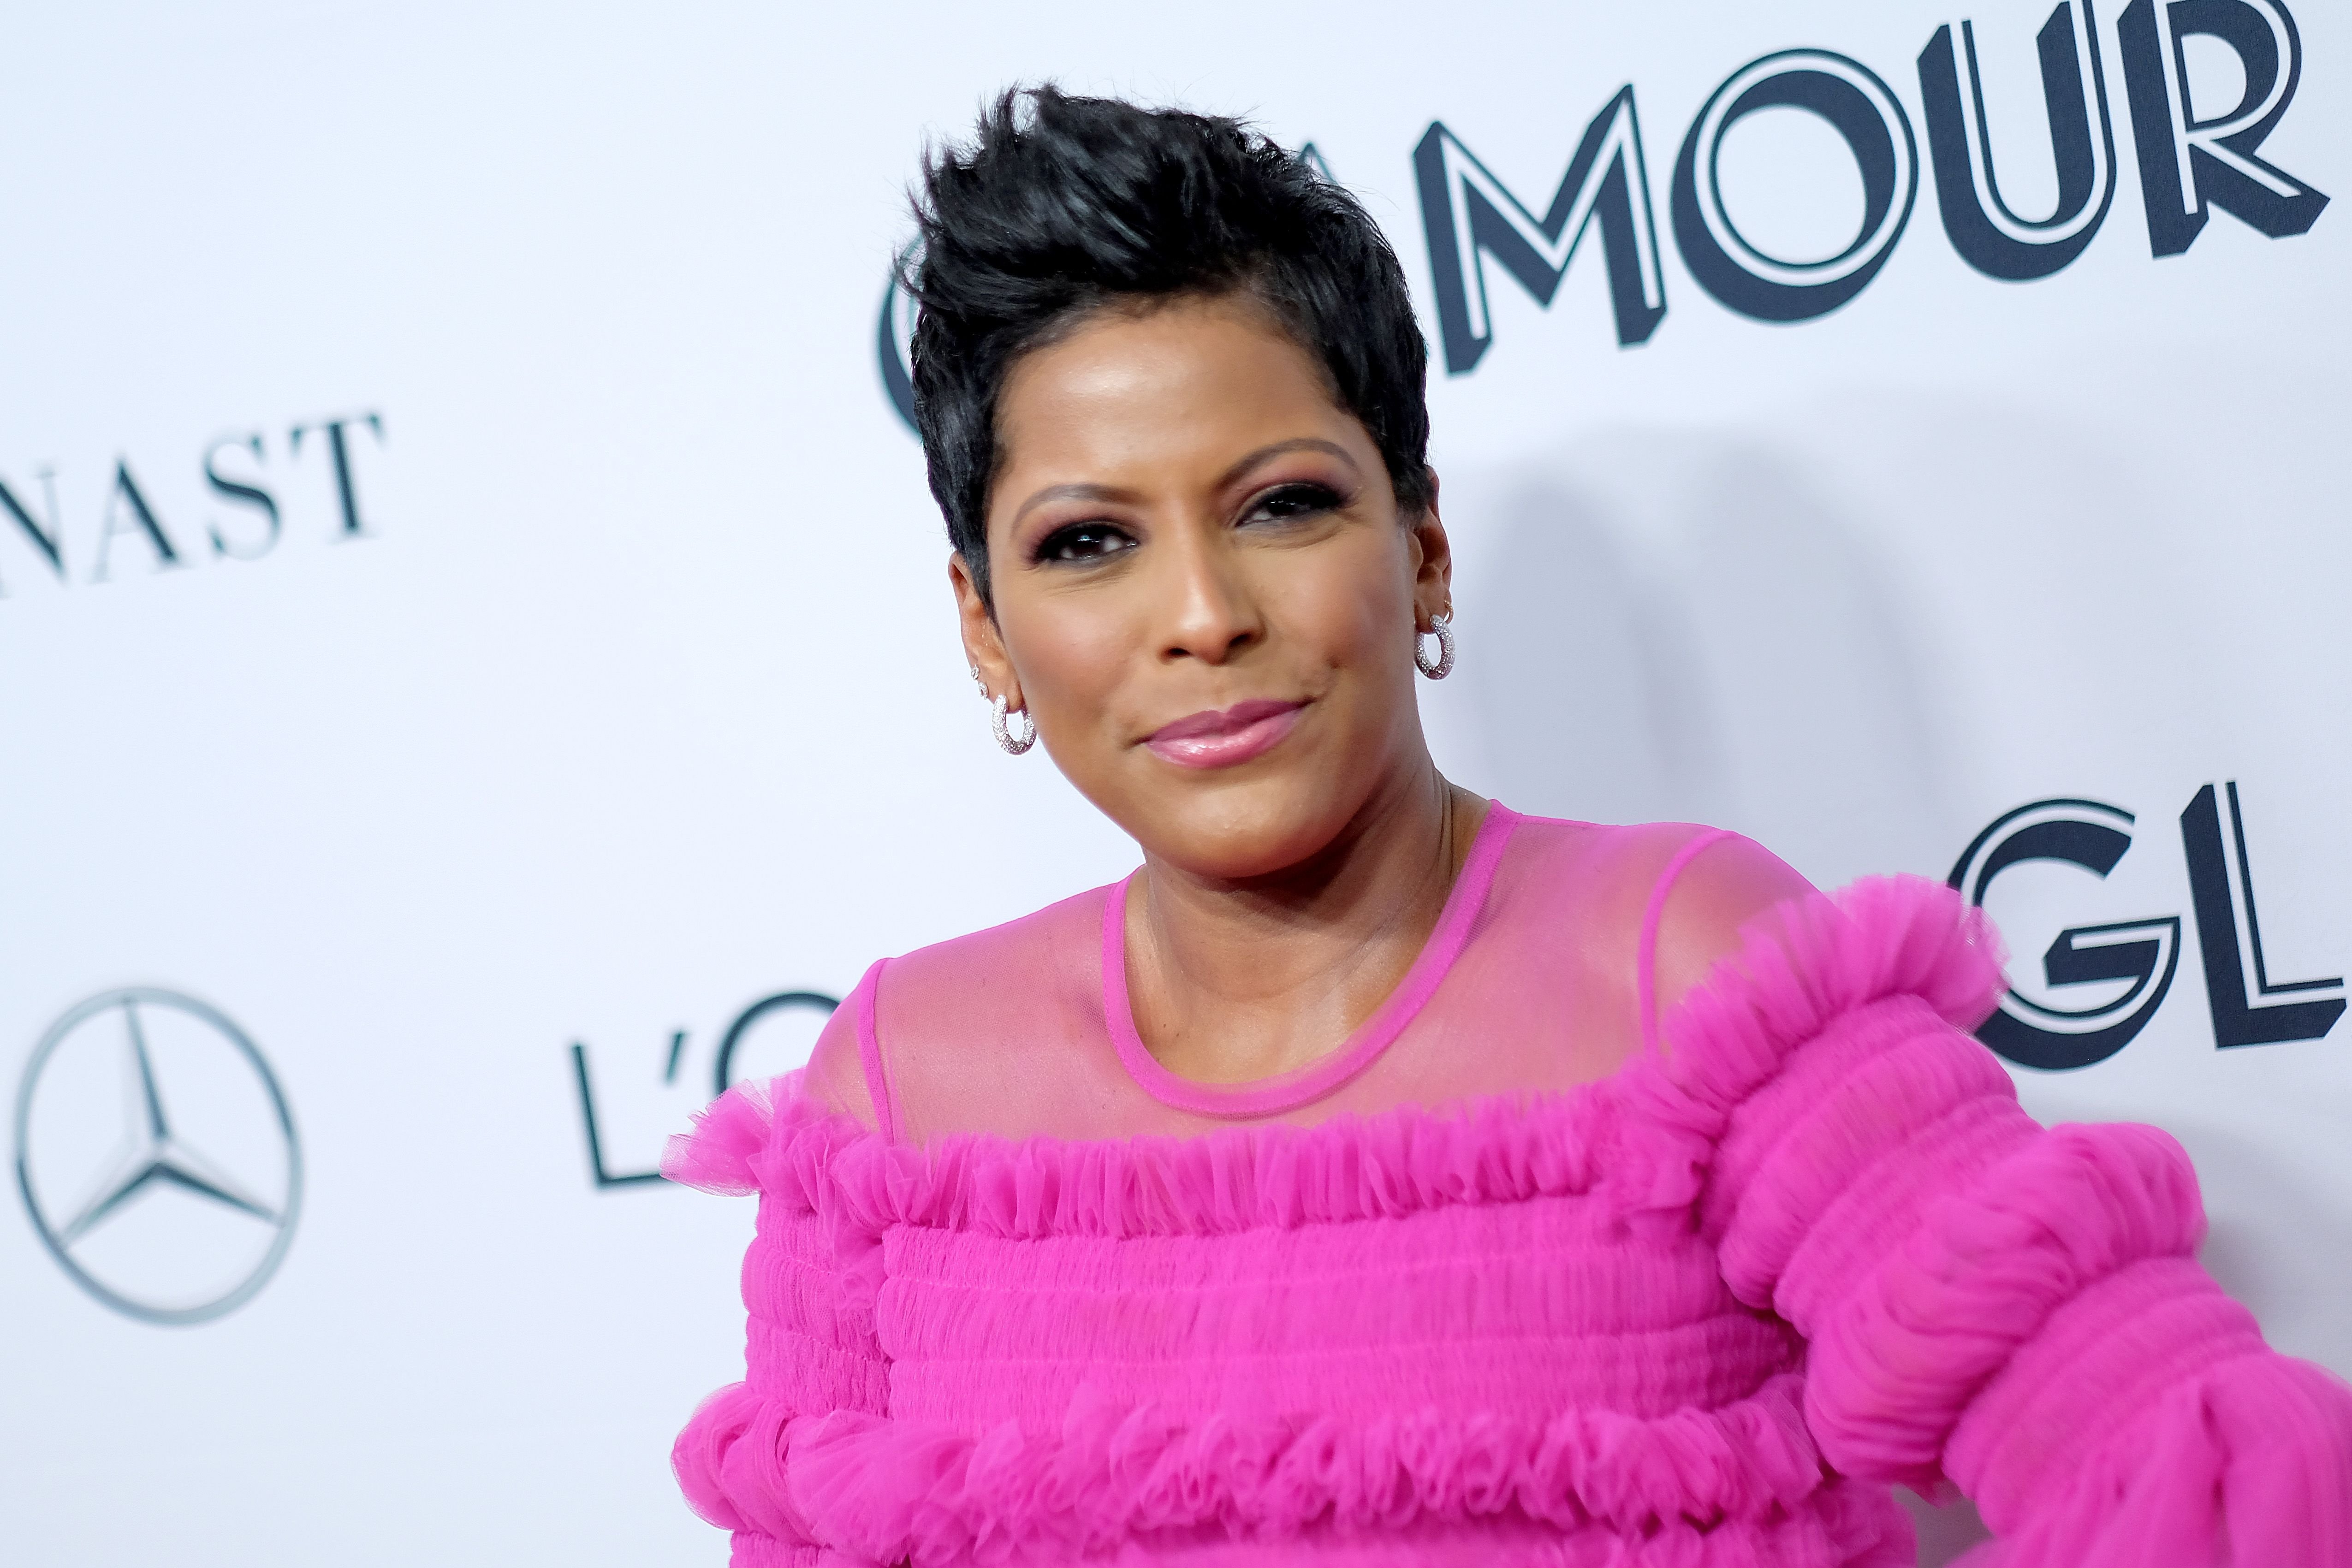 Tamron Hall at the 2019 Glamour Women Of The Year Awards at Alice Tully Hall on November 11, 2019 | Photo: Getty Images